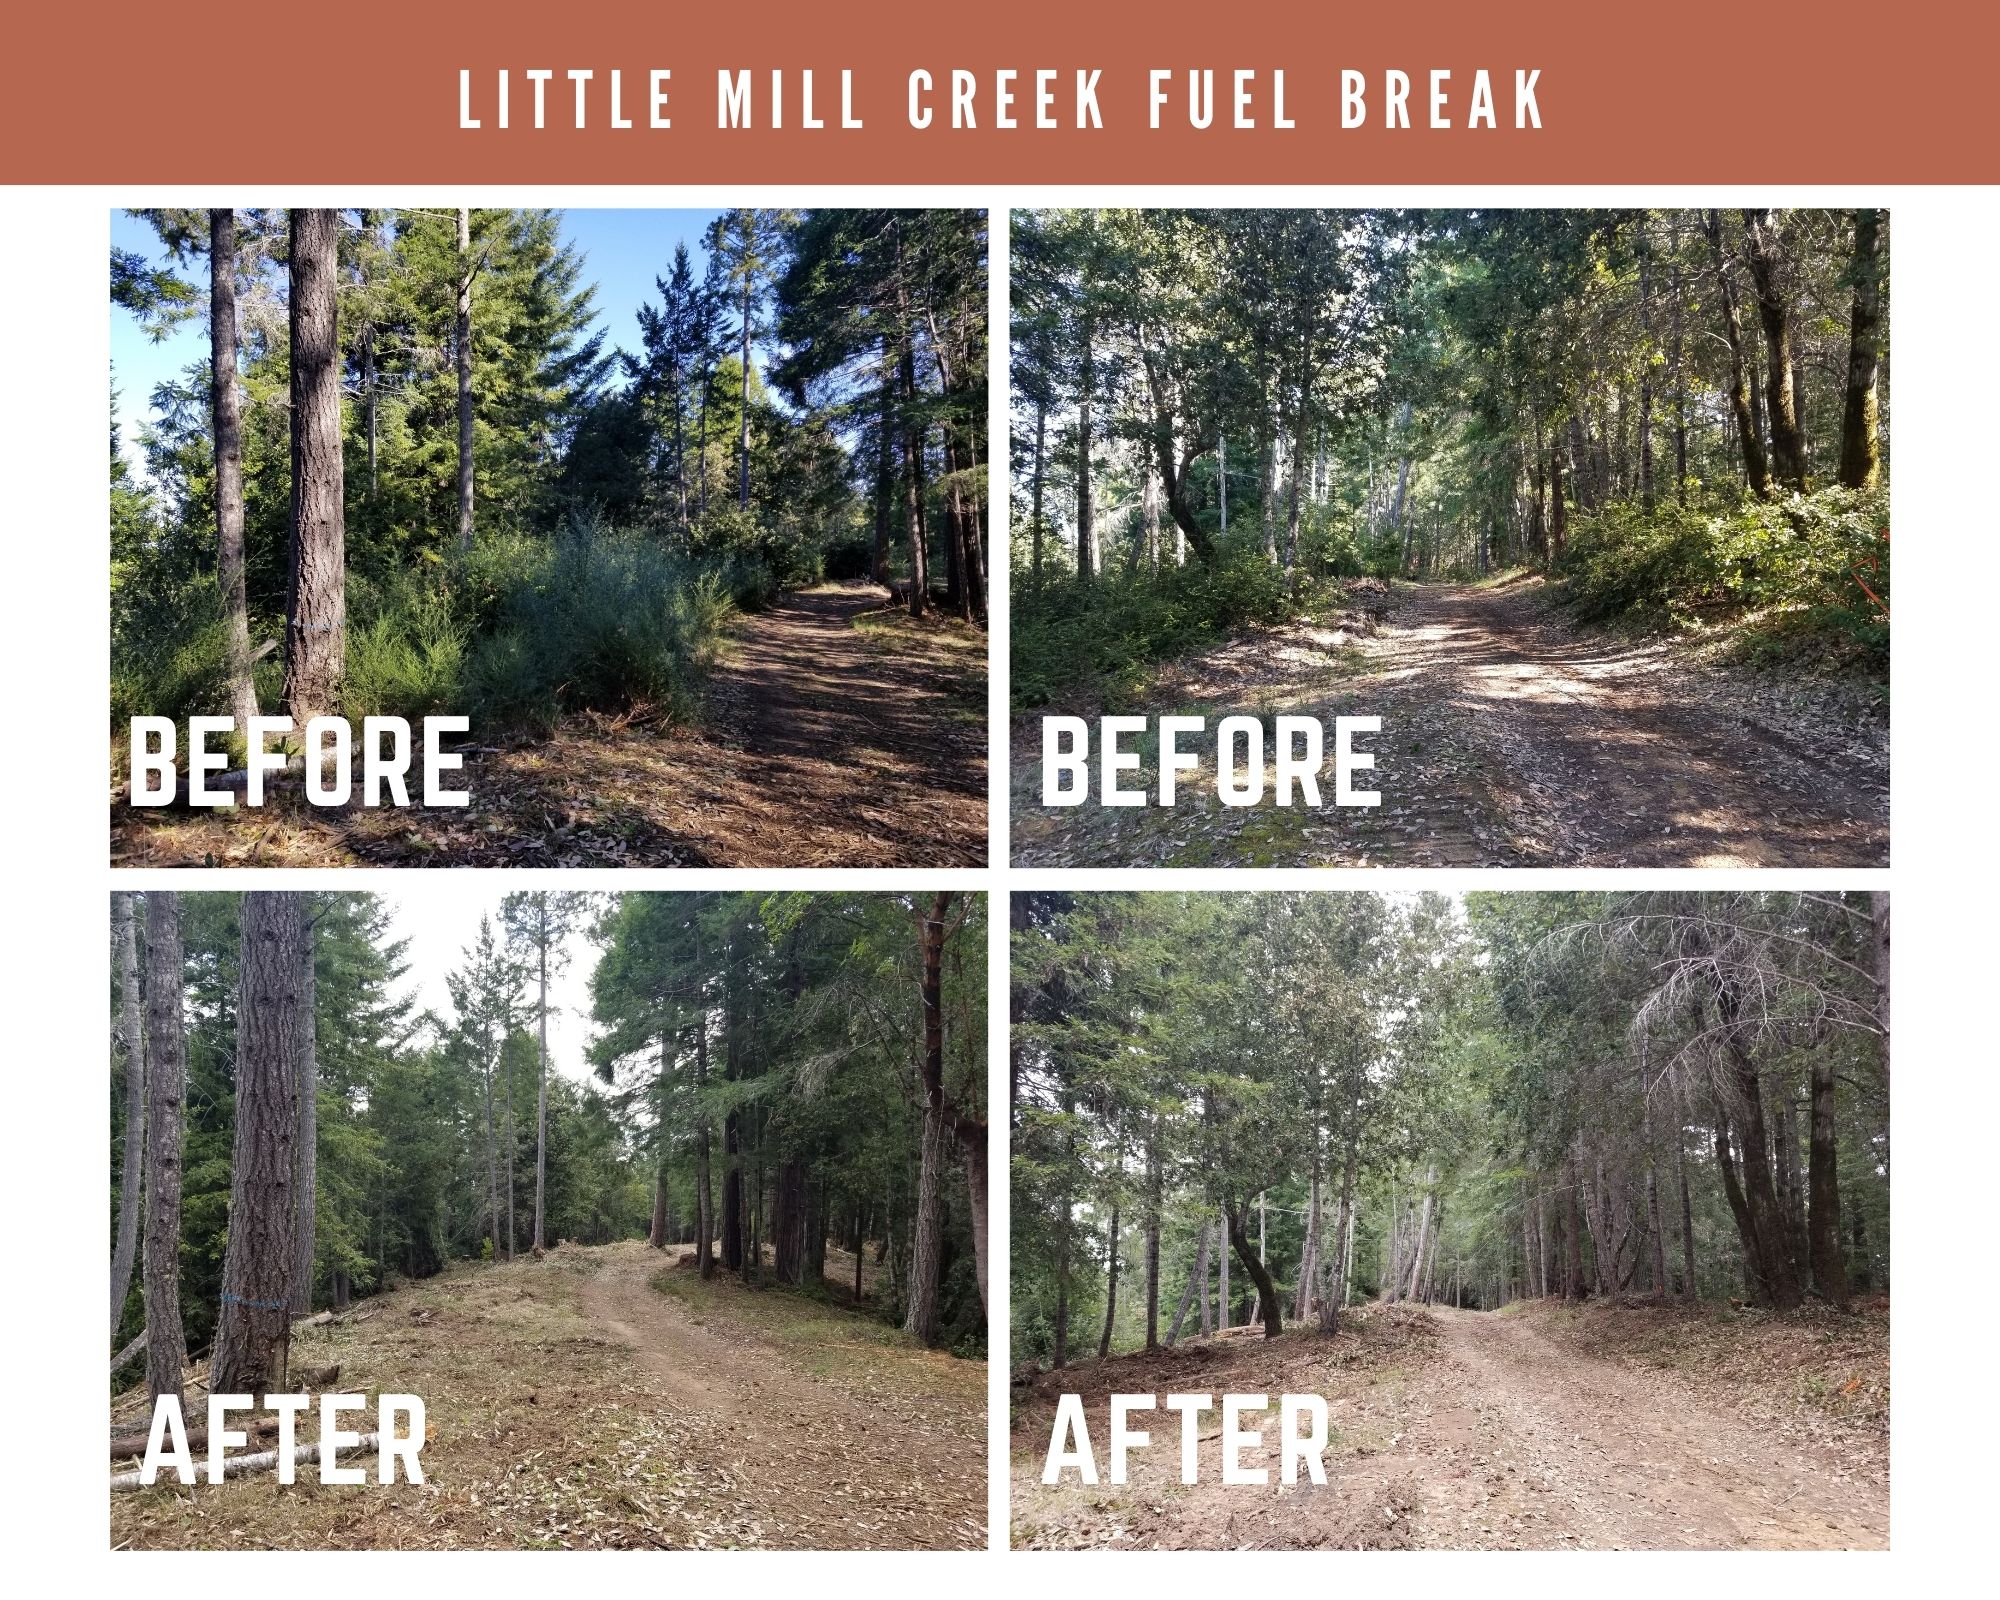 Little Mill Creek fuel break before and after